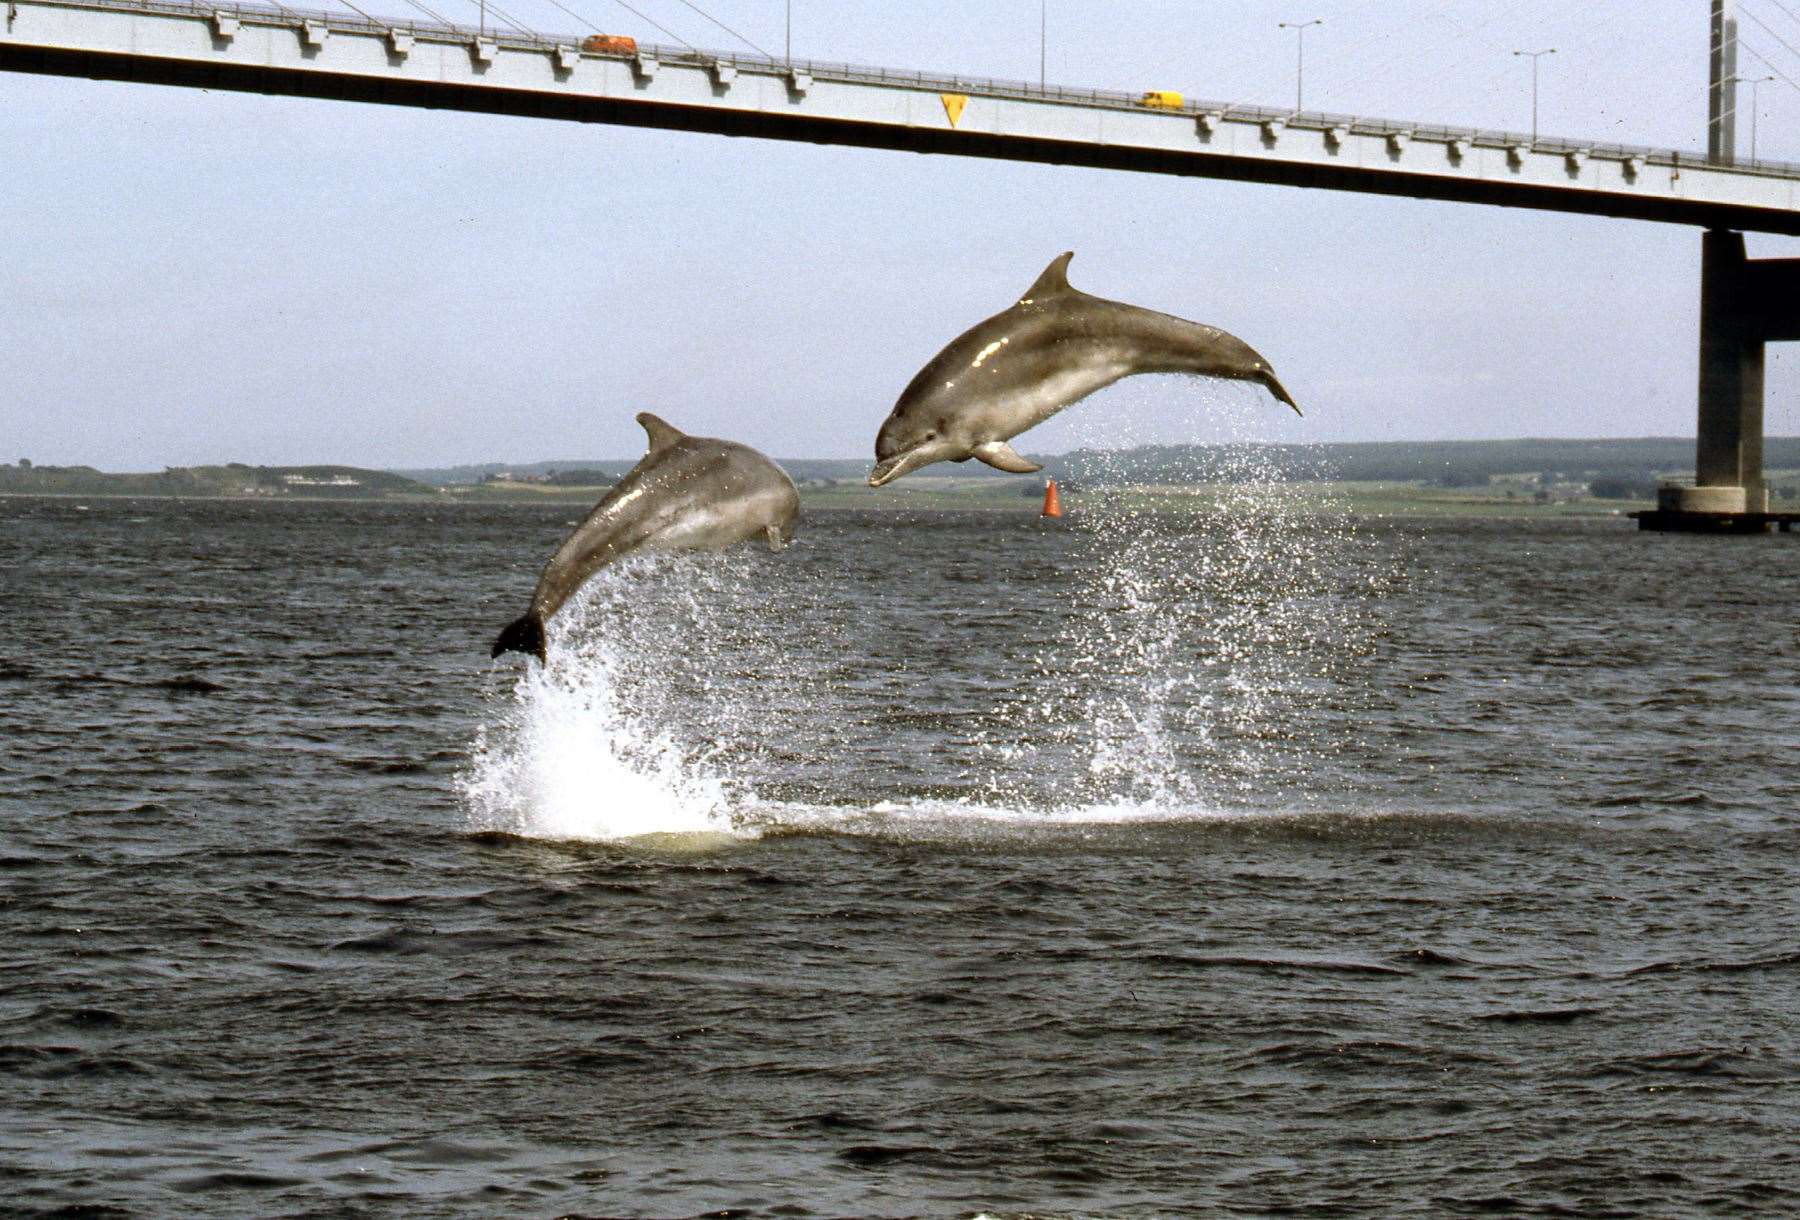 Dr Paul Thompson’s image from 1990 of two dolphins jumping under the Kessock Bridge appeared in the Courier on November 16 that year.